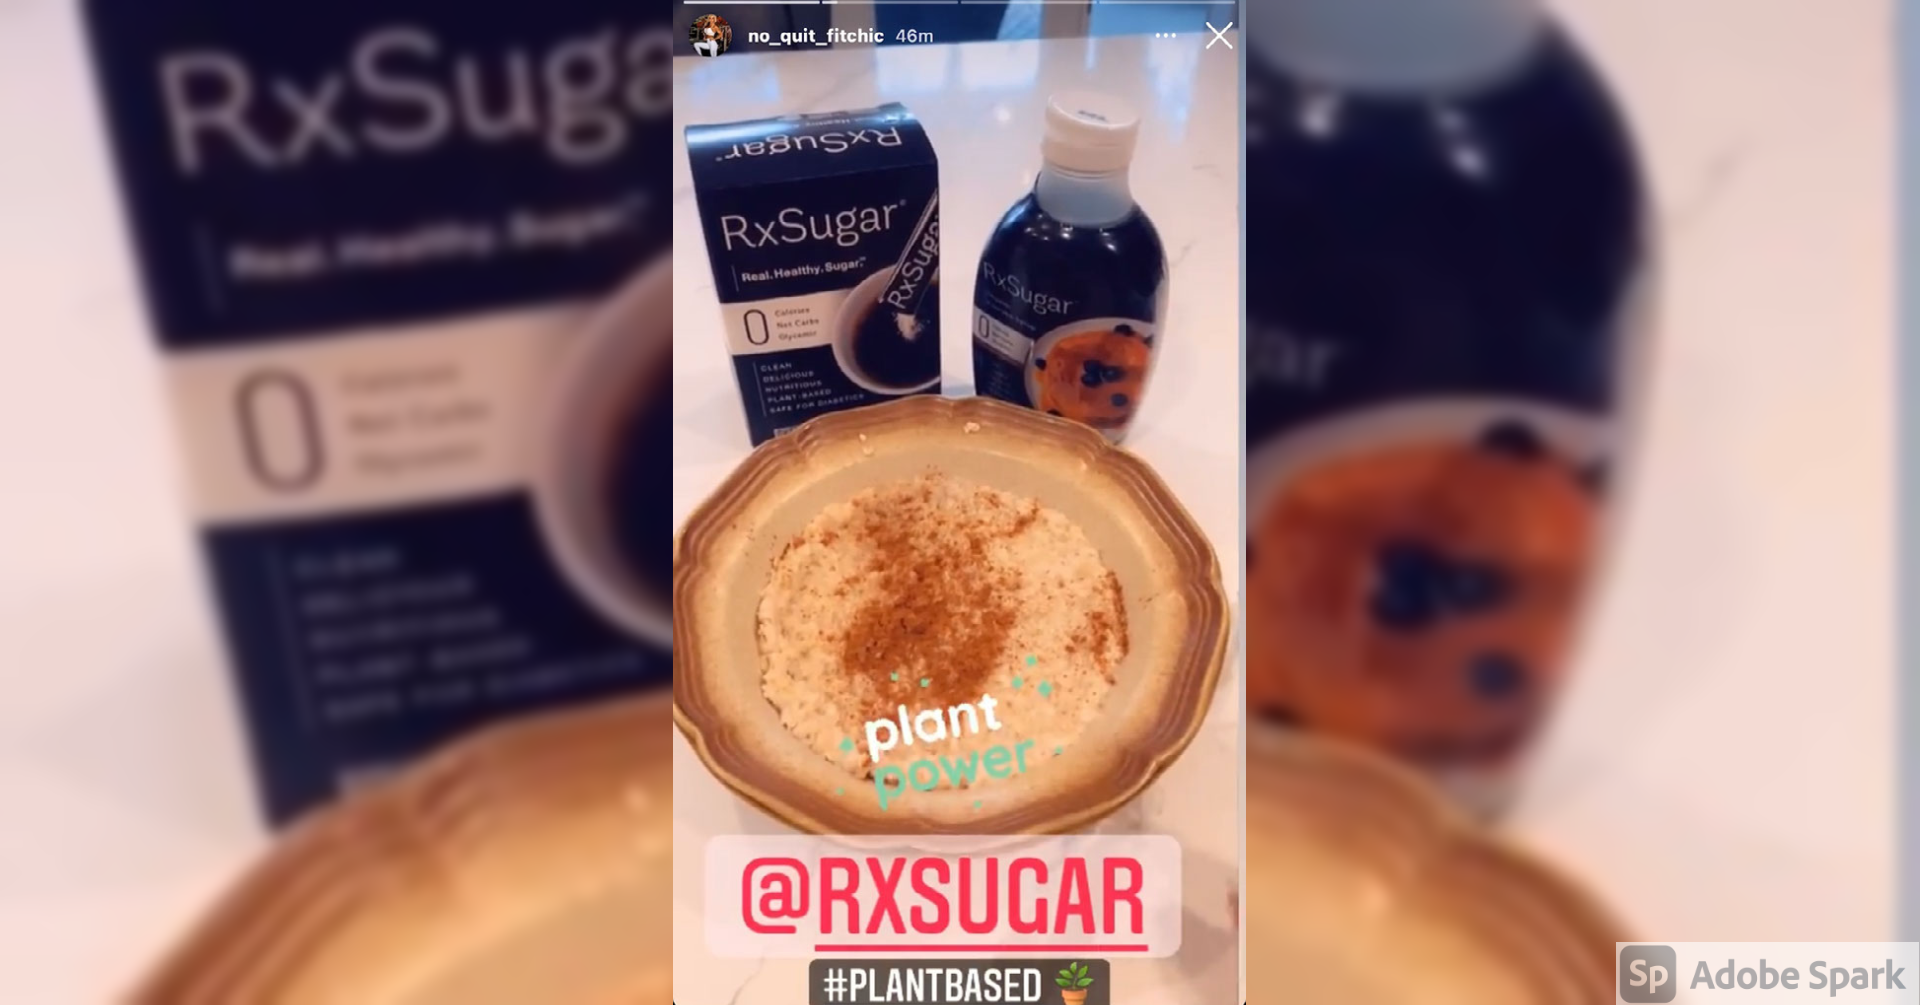 No Quit Fit Chic Obsessing Over Her RxSugar Organic Pancake Syrup